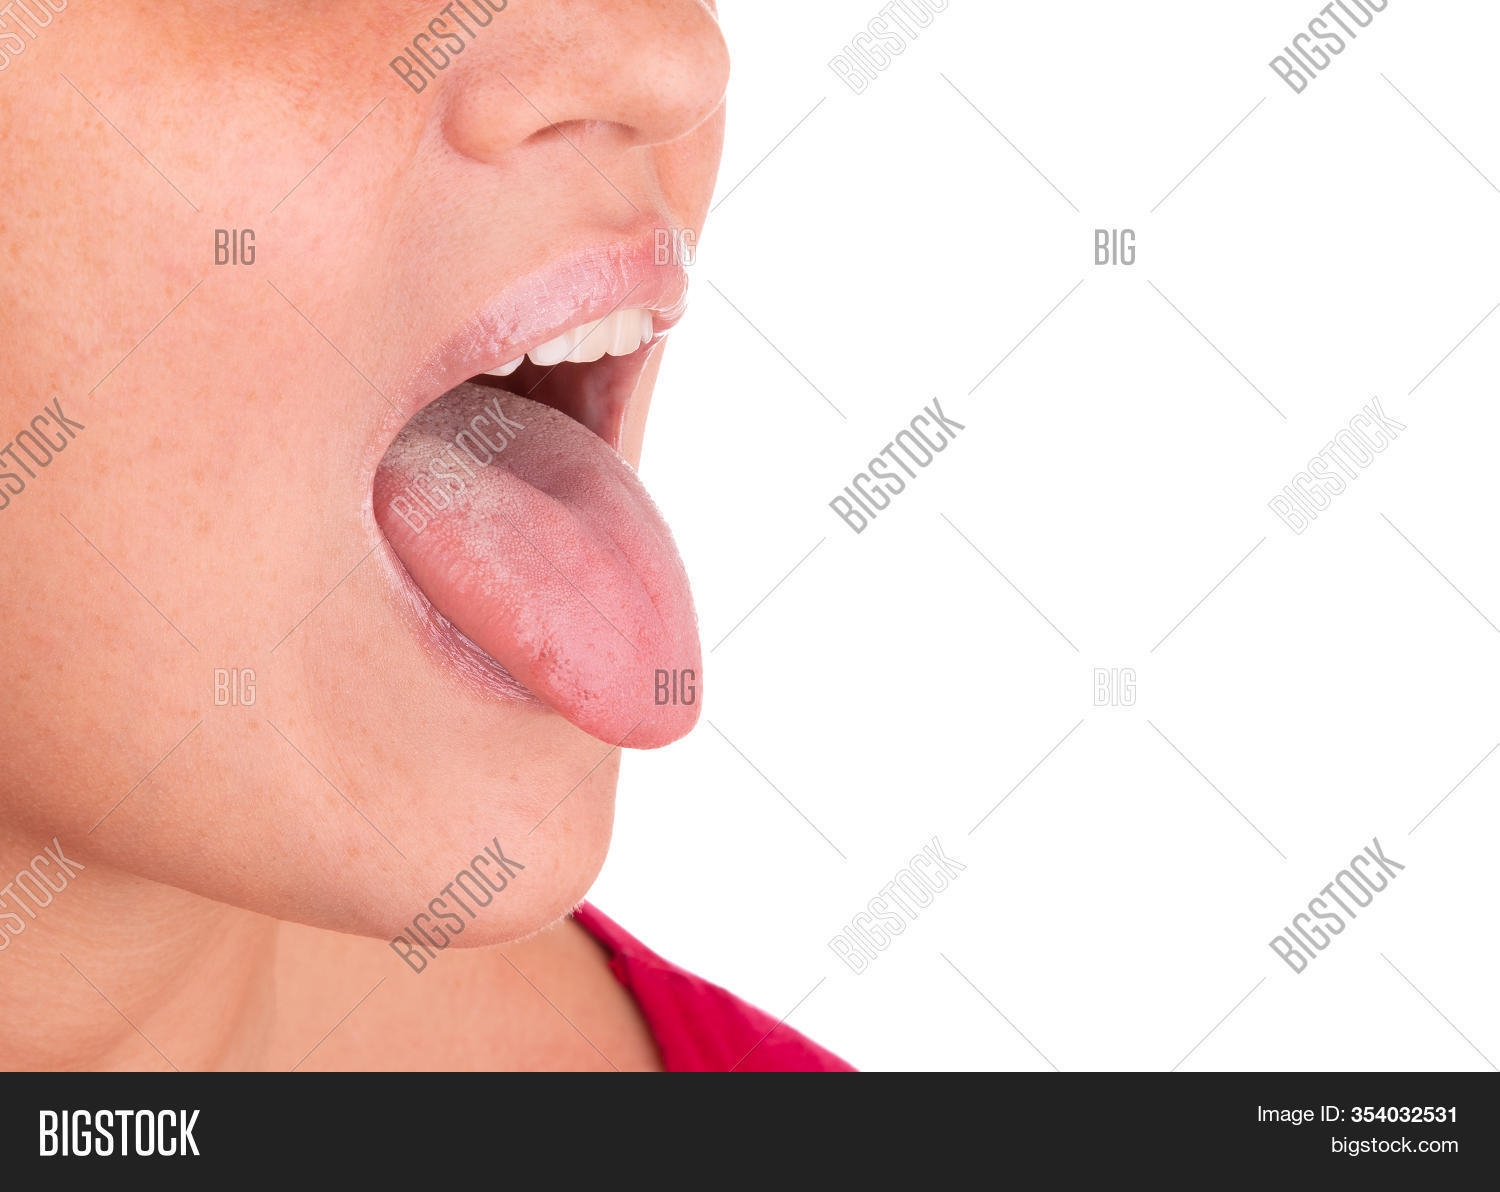 donald fuhrmann recommends mouth open tongue out pics pic